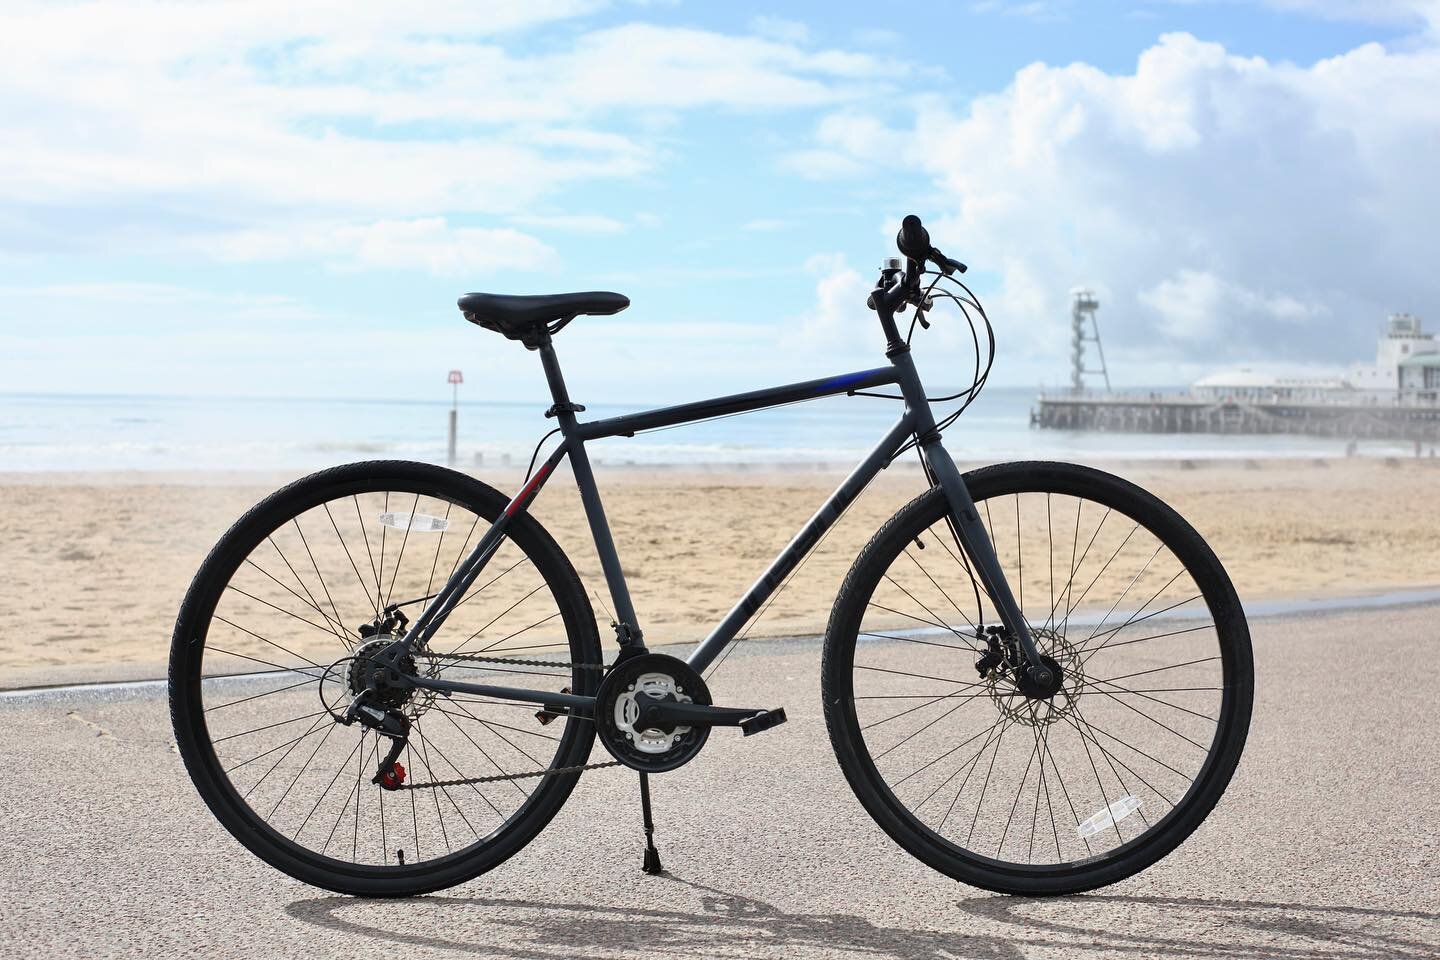 We&rsquo;ve got fresh new bikes lined up and ready for some summer pedalling. 
.
#bournemouth #bournemouthbeach #beach #cycle #bikehire #visitbournemouth